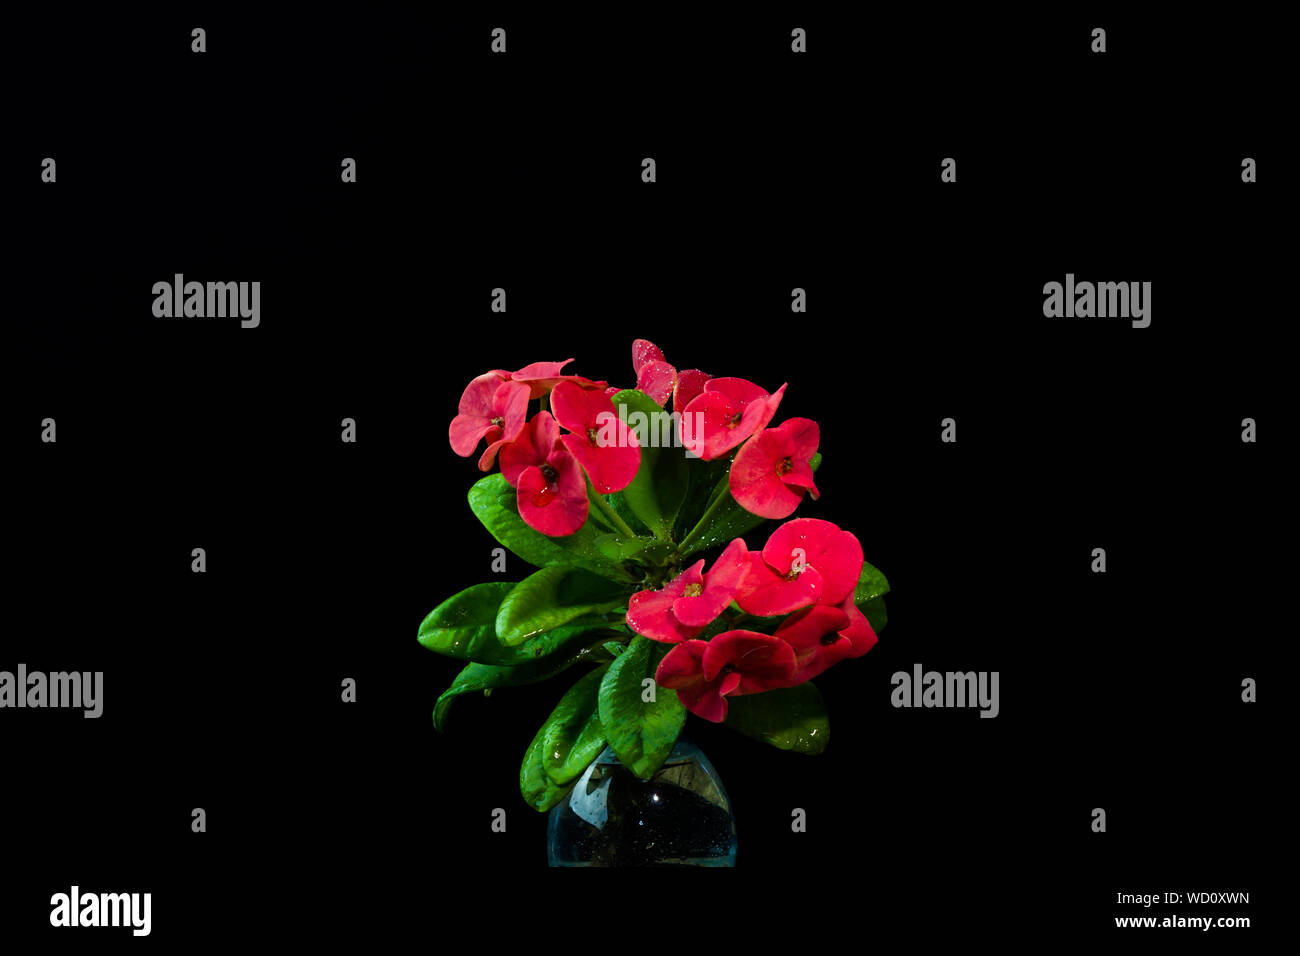 Close-up Of Red Flowers Against Black Background Stock Photo